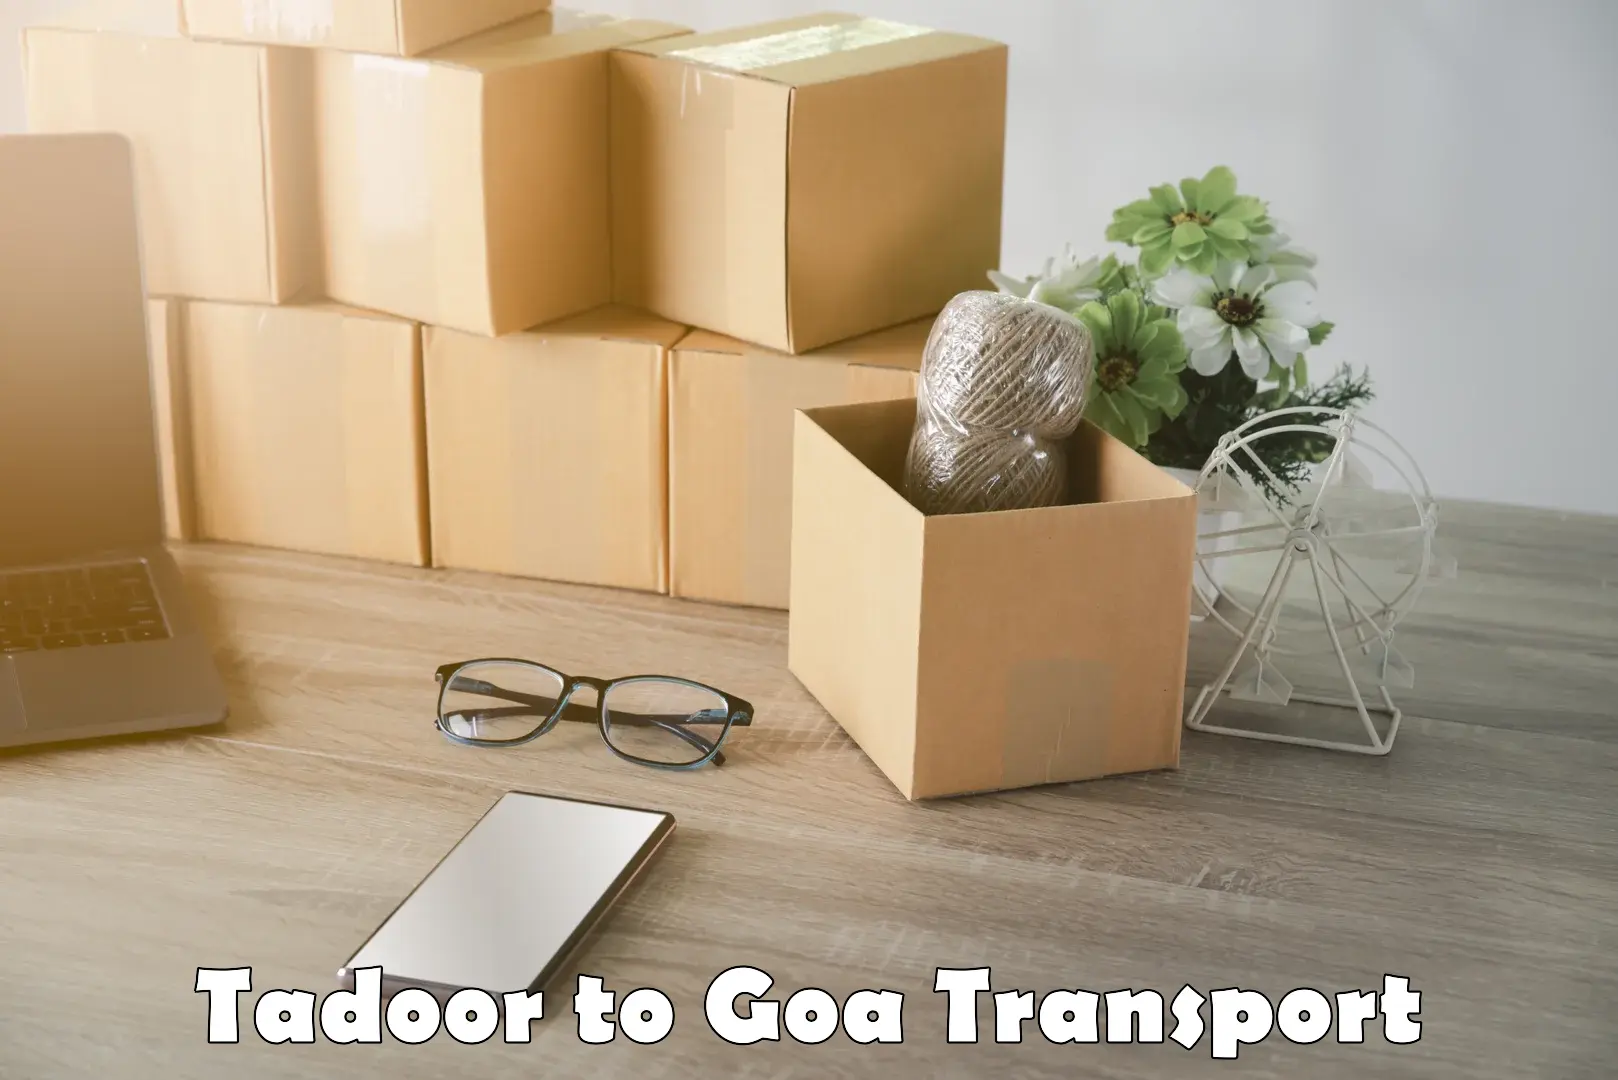 Nationwide transport services Tadoor to Bardez